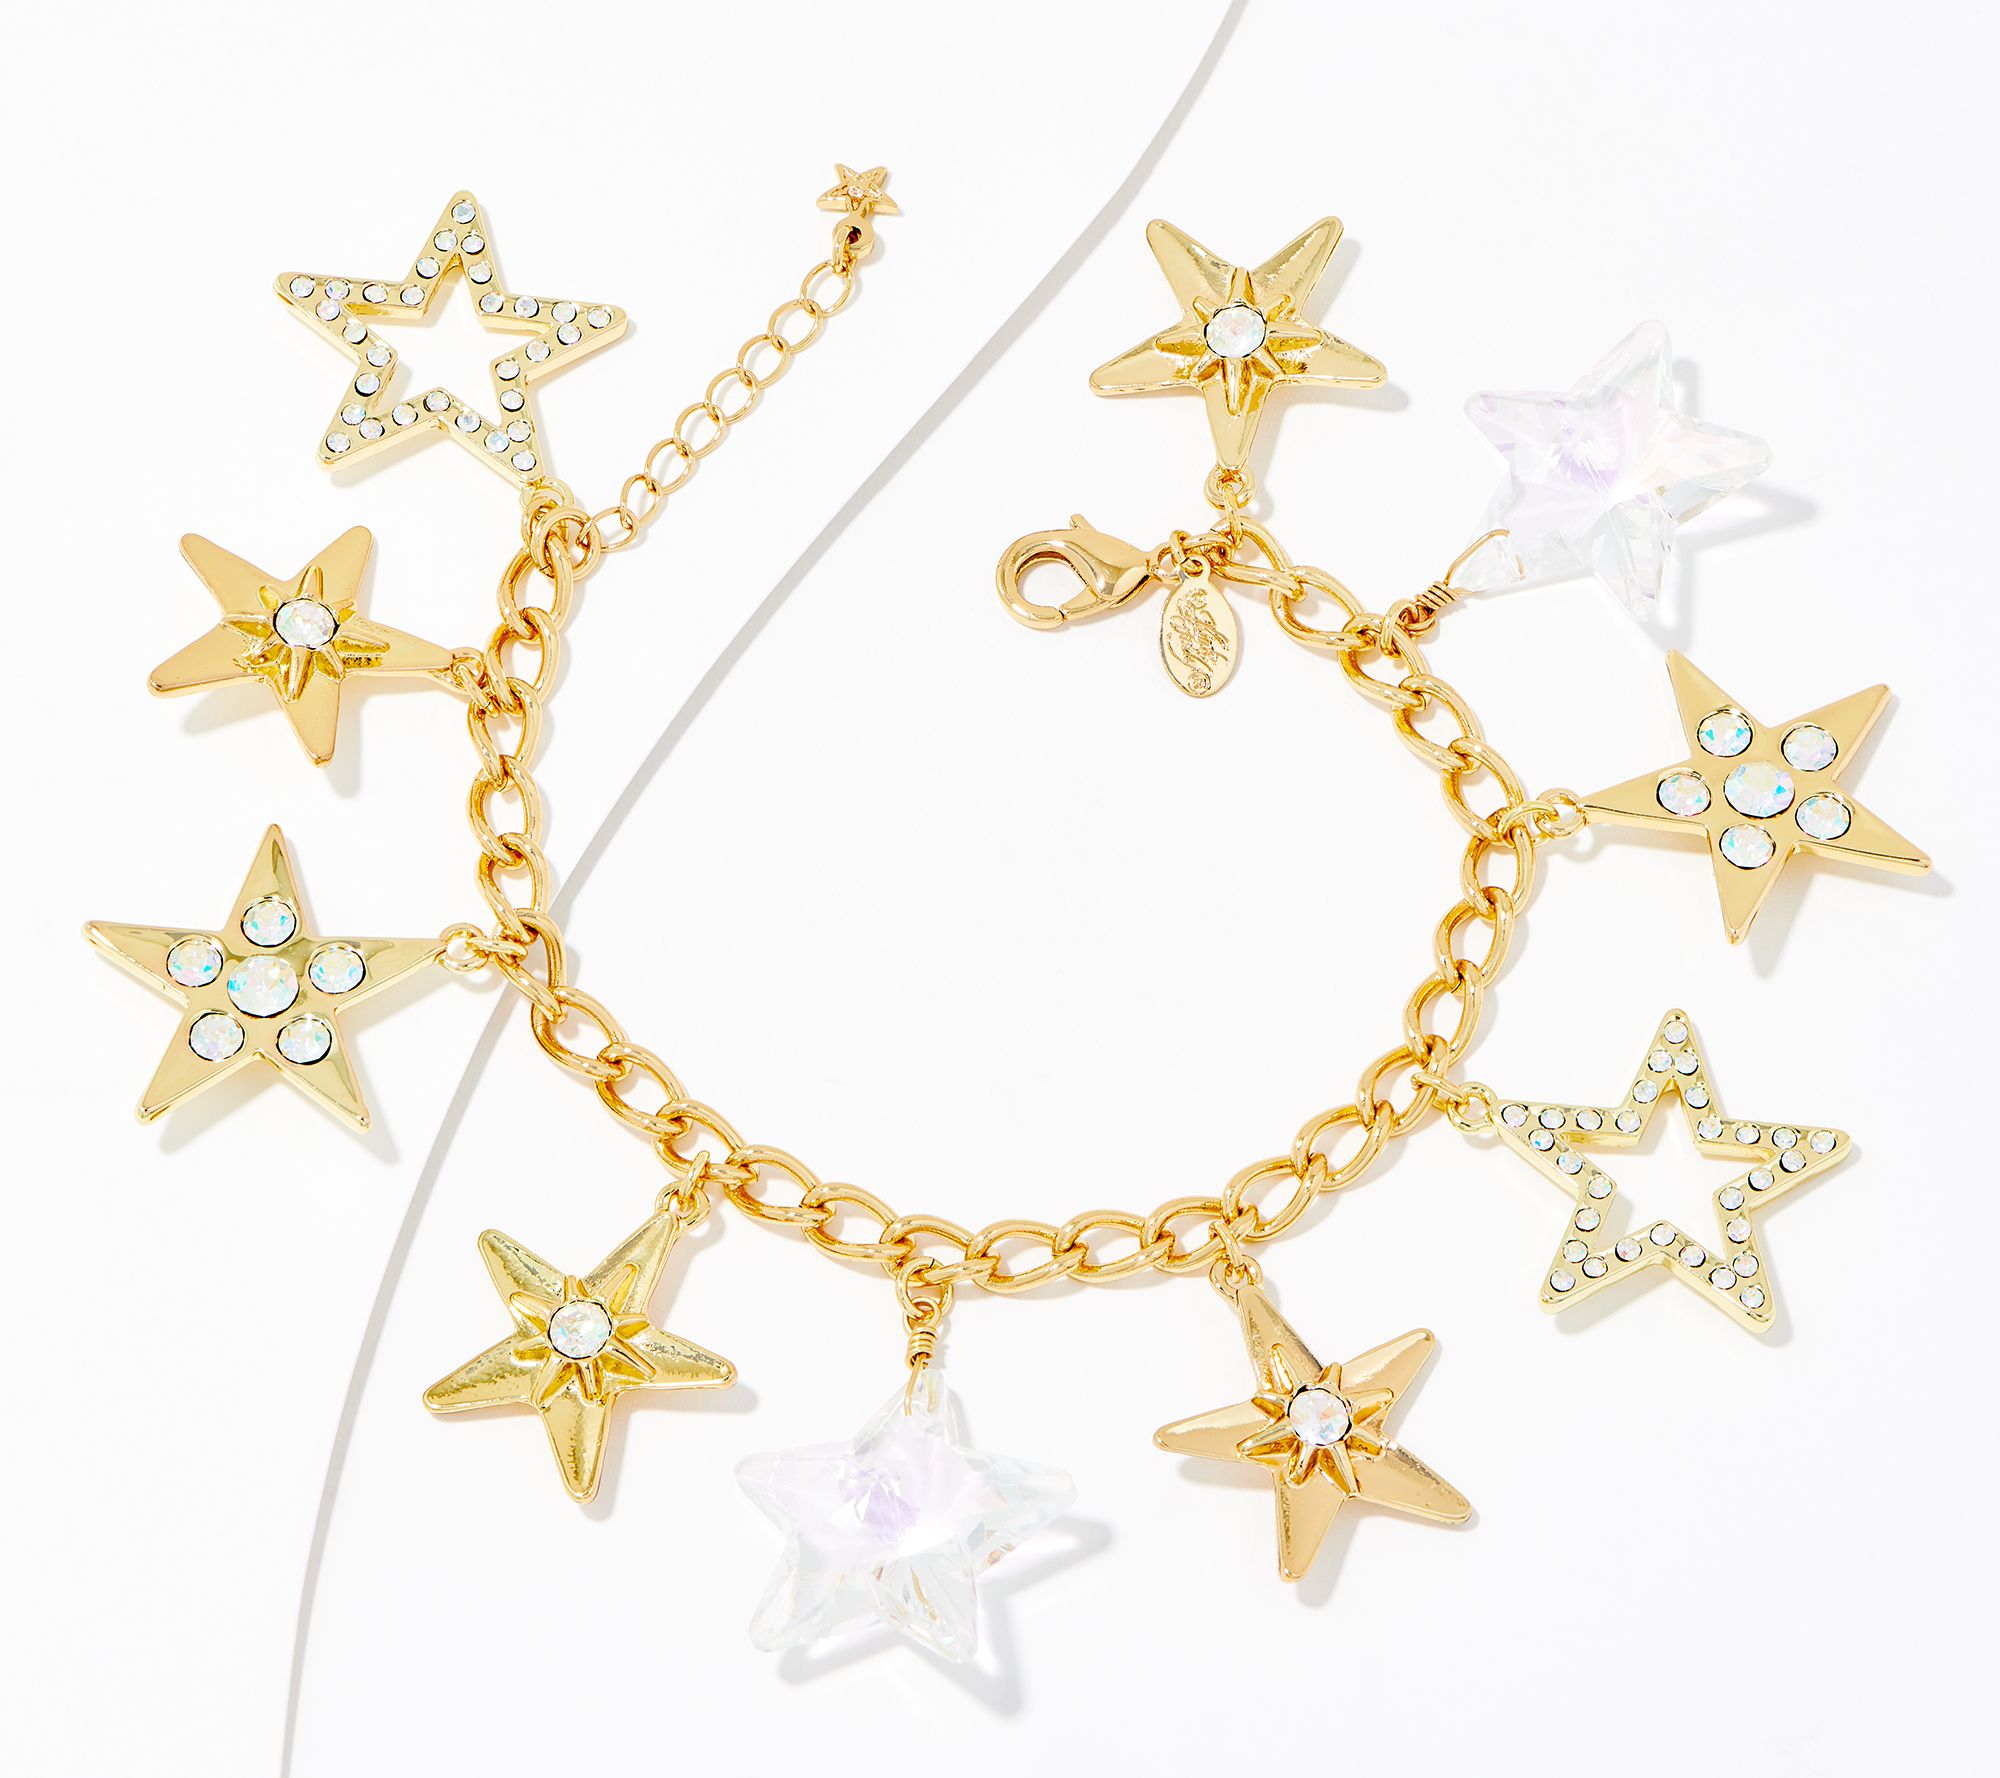 Yellow Gold Star Pendant Necklace with Red Stardust